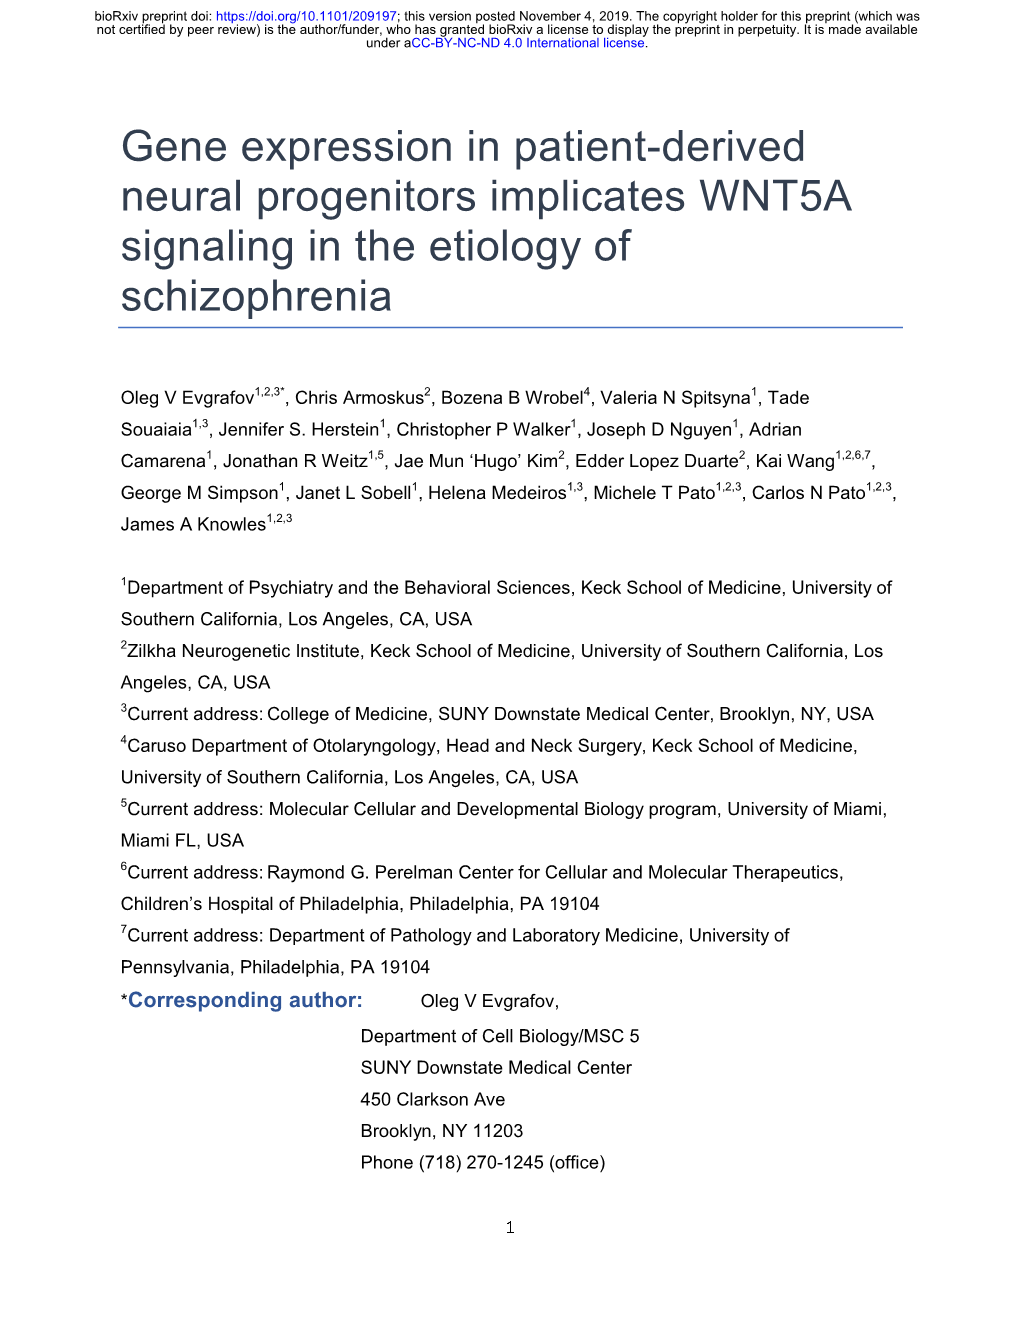 Gene Expression in Patient-Derived Neural Progenitors Implicates WNT5A Signaling in the Etiology Of